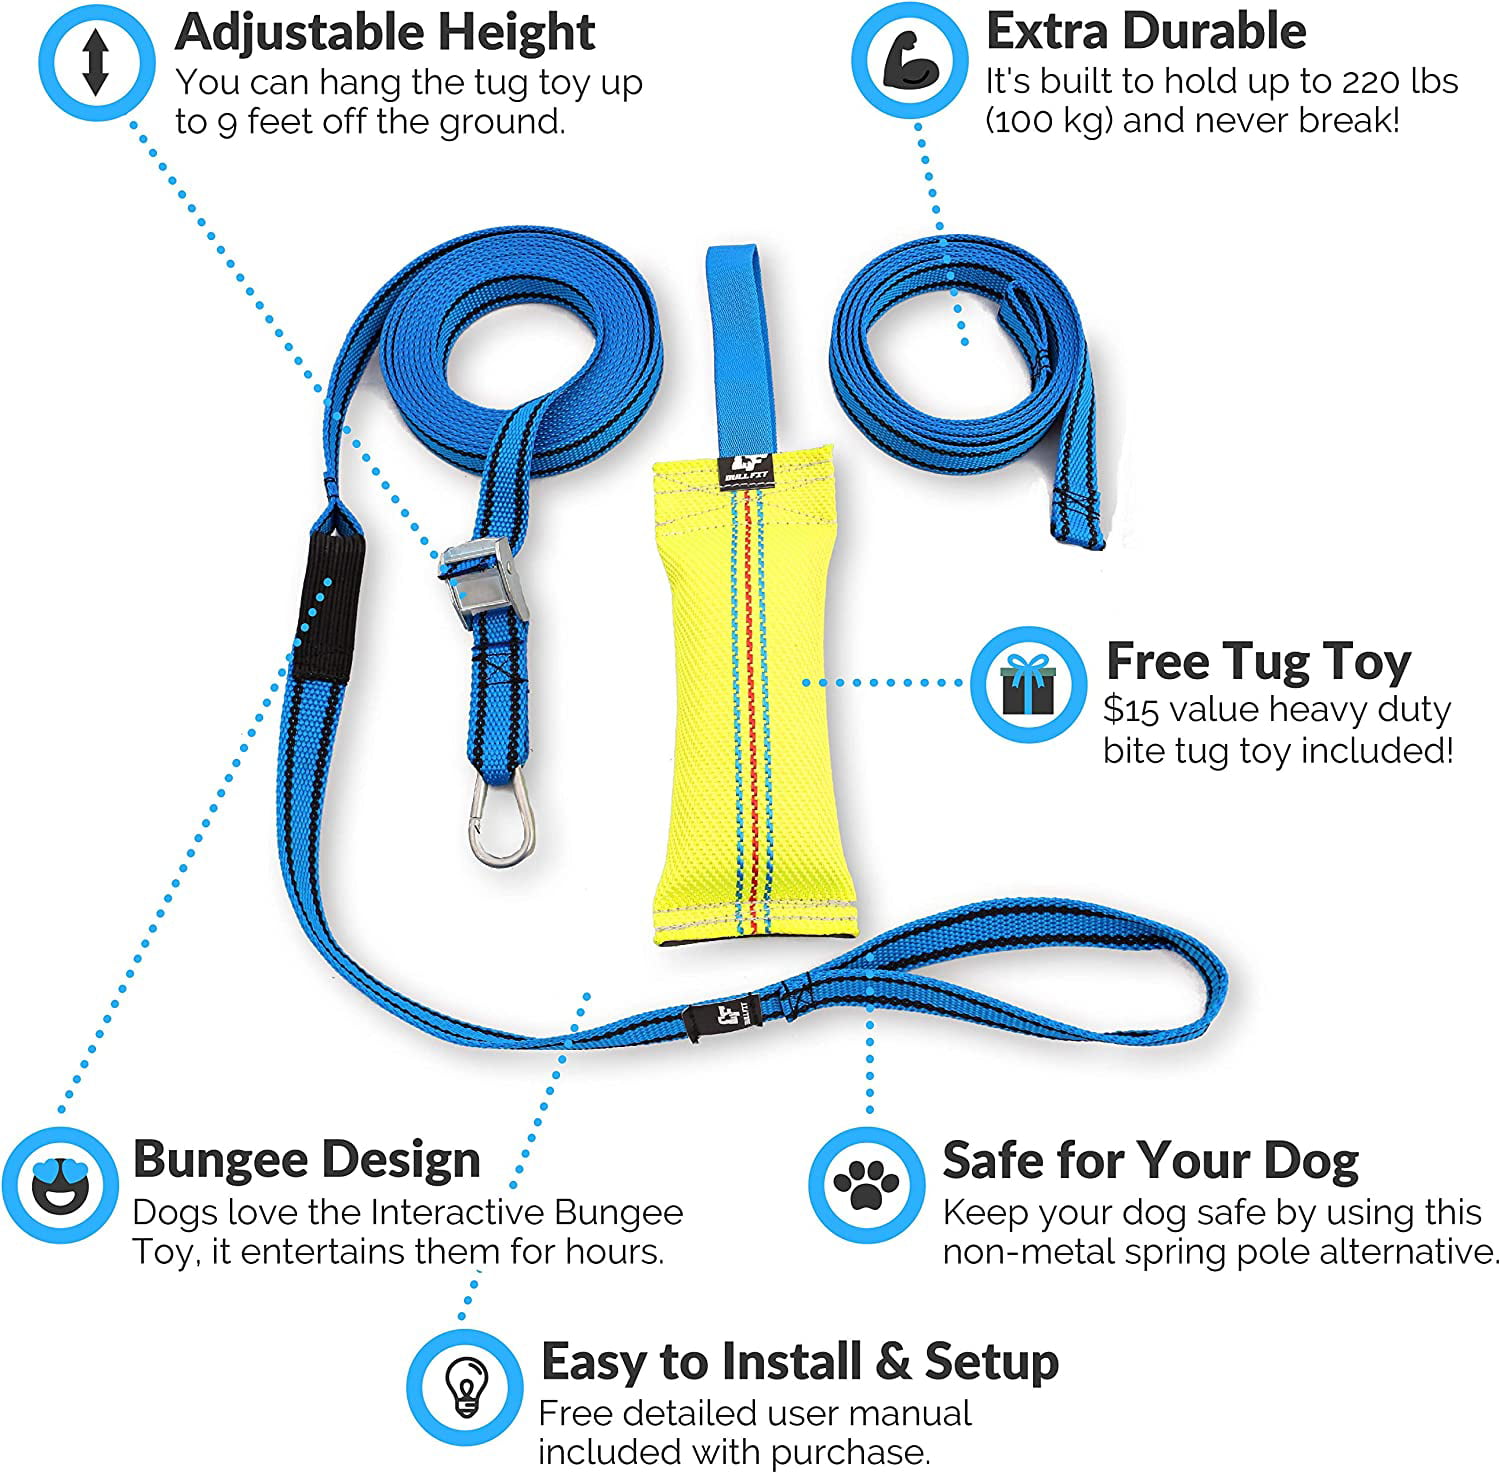 Tough Fire Hose Bite Tug Toy Included Outdoor Hanging Bungee Dog Toy Interactive Tugger for Safe & Fun Solo Play Durable Spring Pole for Pitbull & Medium to Large Dogs Exercise and Tug of War 